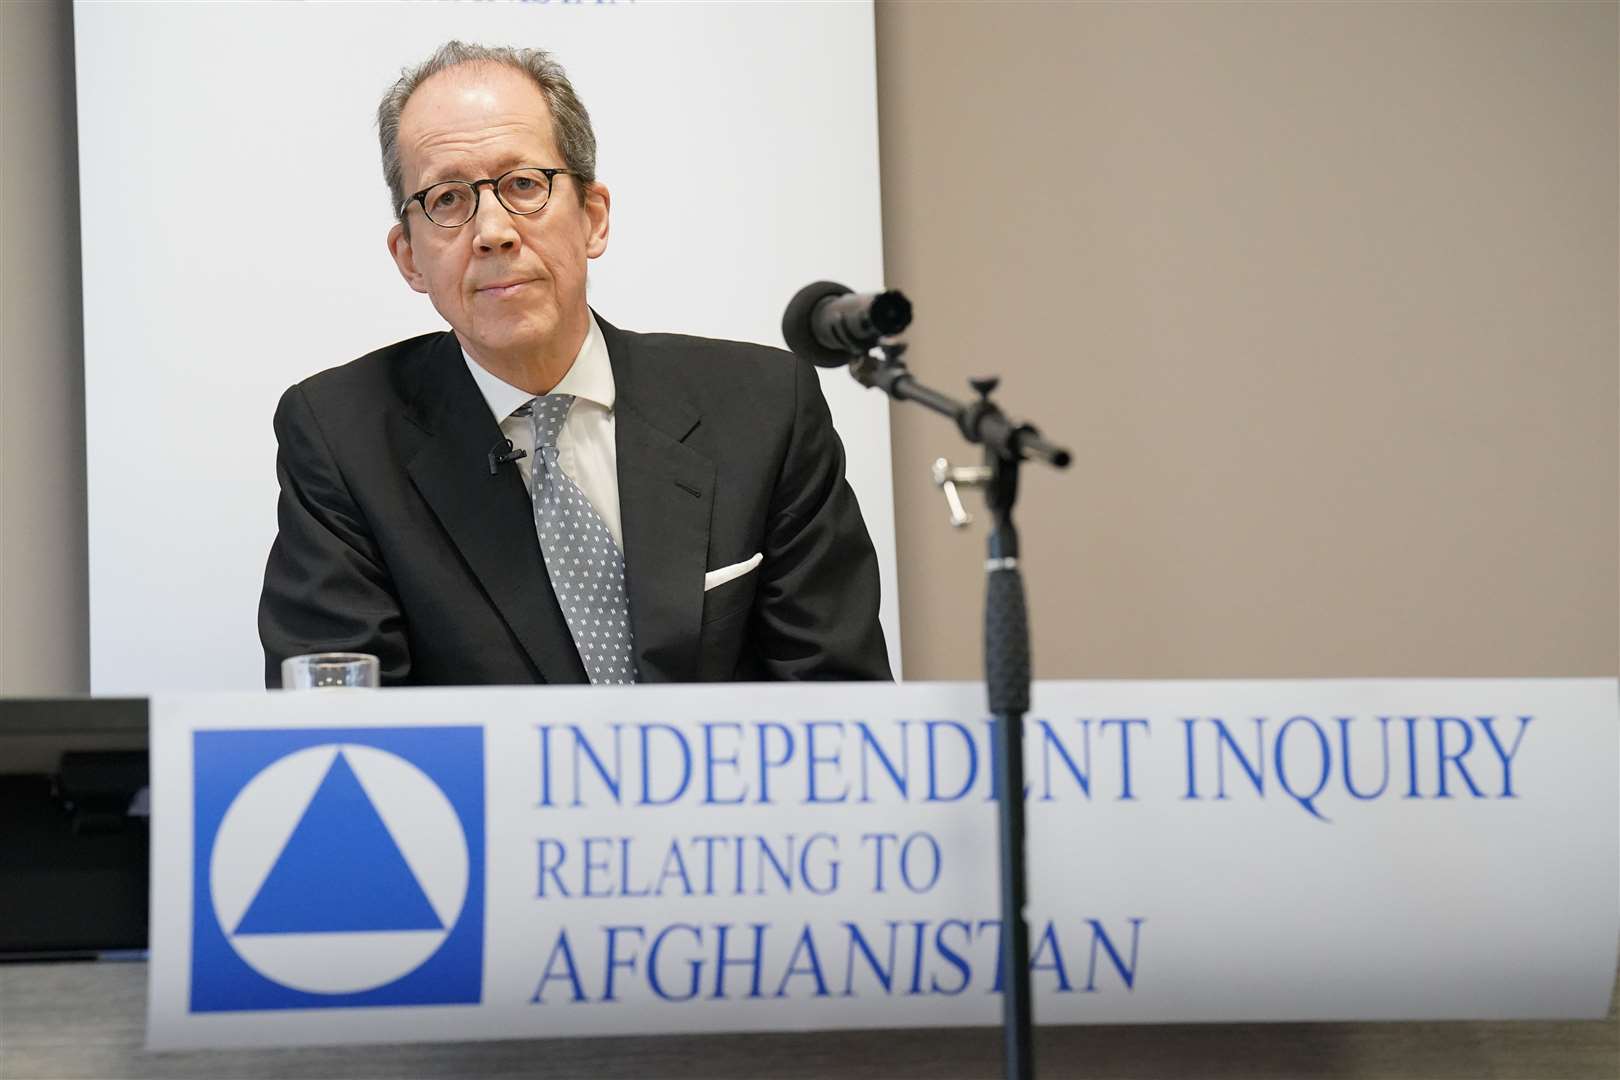 Lord Justice Haddon-Cave, chair of the Independent Inquiry relating to Afghanistan, reads an opening statement during the inquiry’s official launch at the International Dispute Resolution Centre in London (Jonathan Brady/PA)